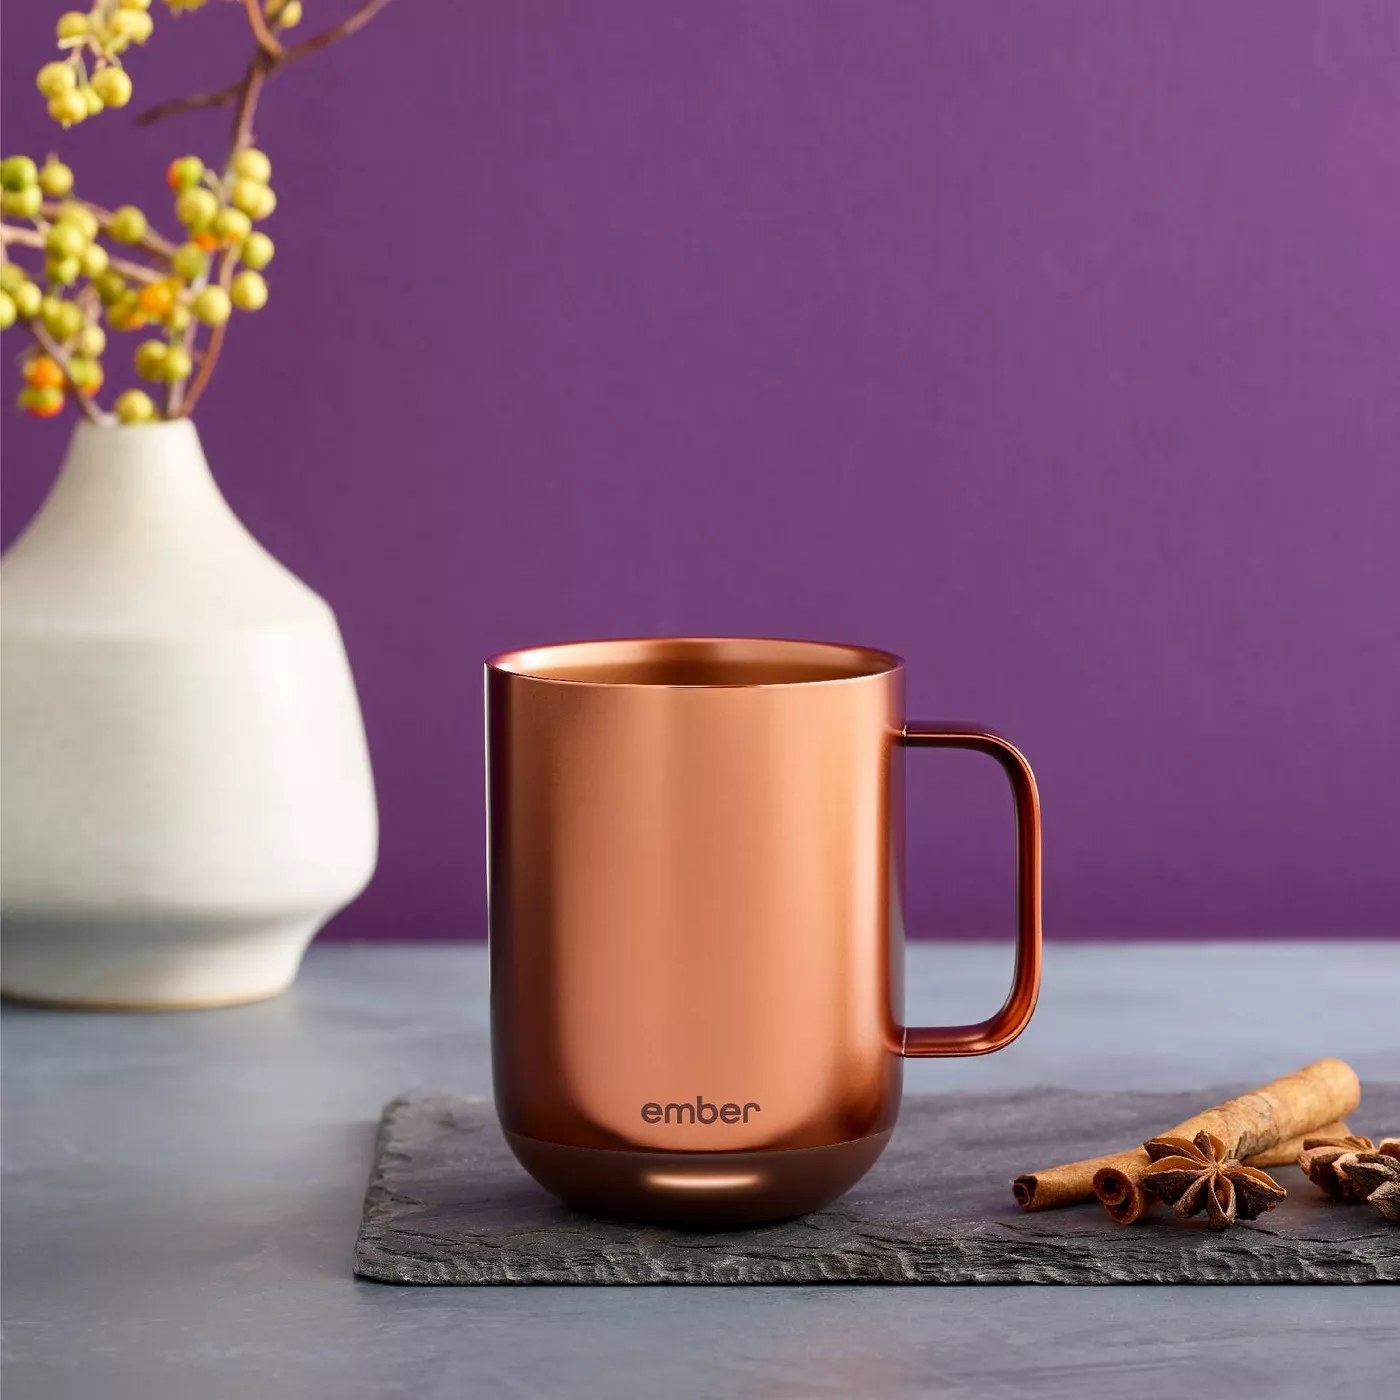 The copper mug with a matching handle on a counter